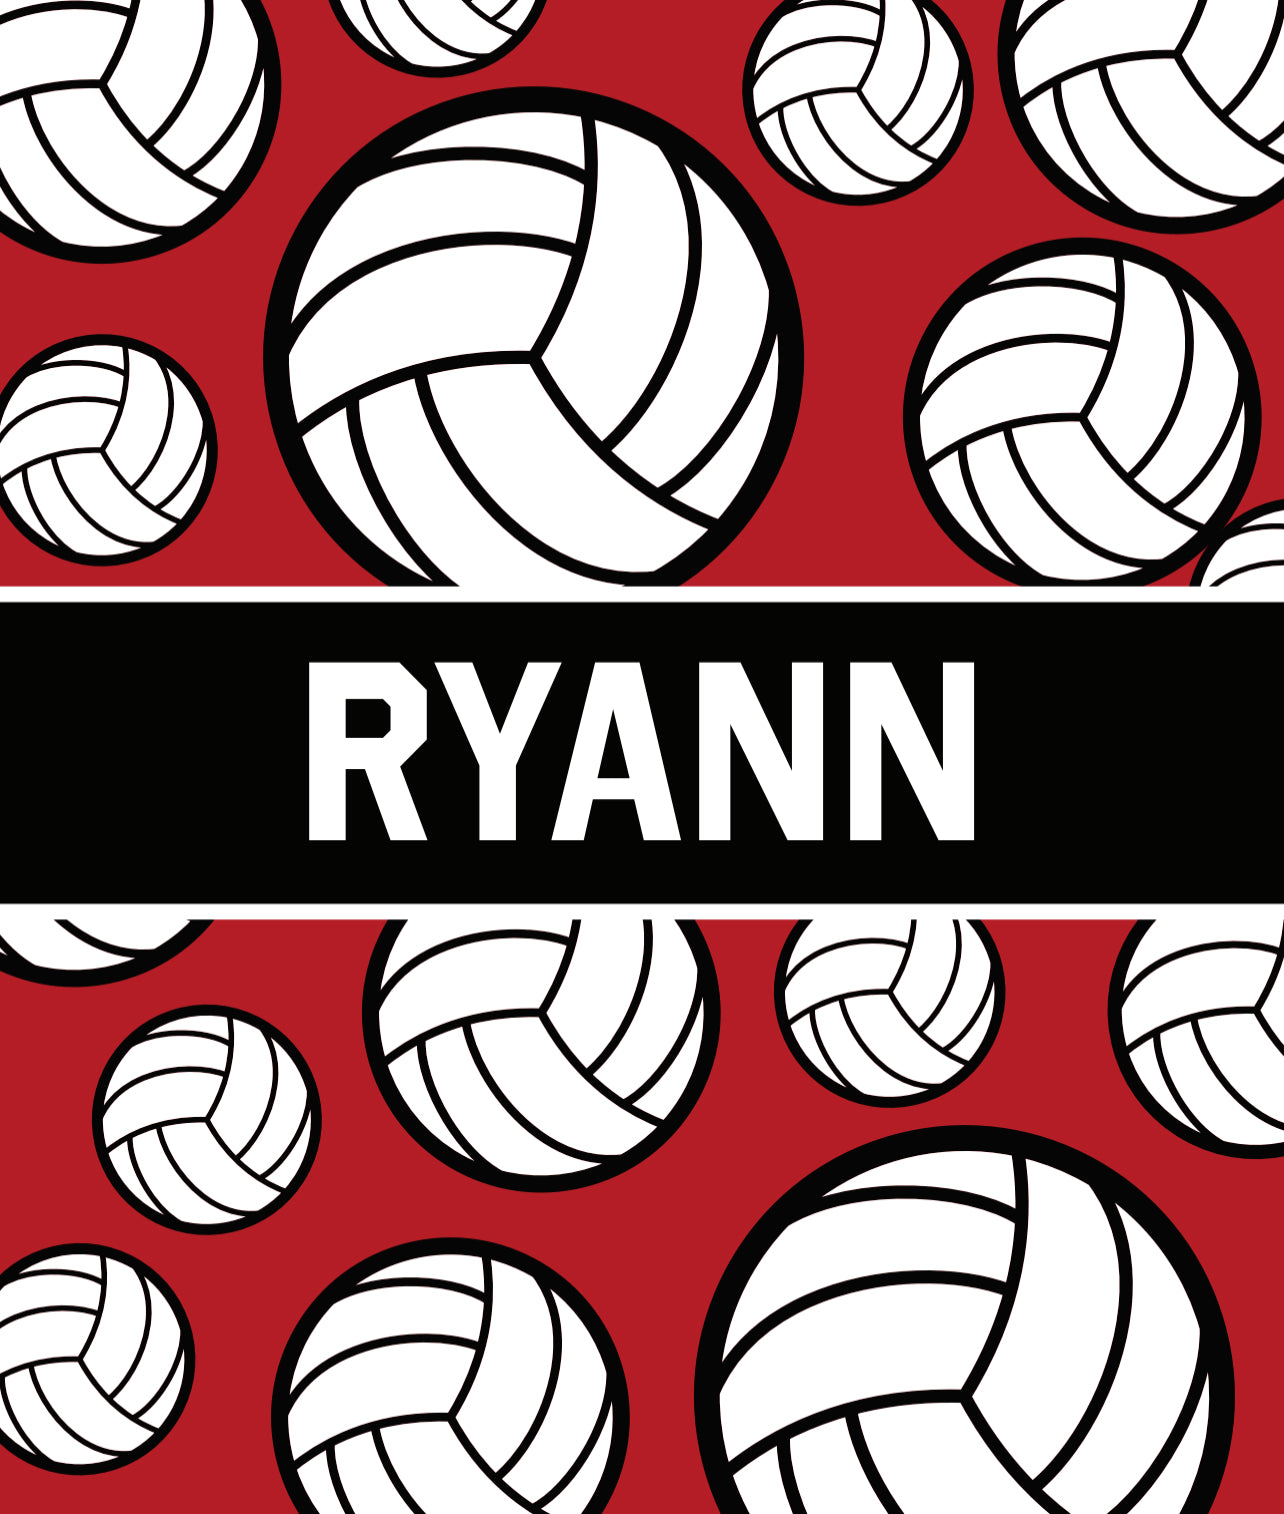 VOLLEYBALL customize in your school's colors